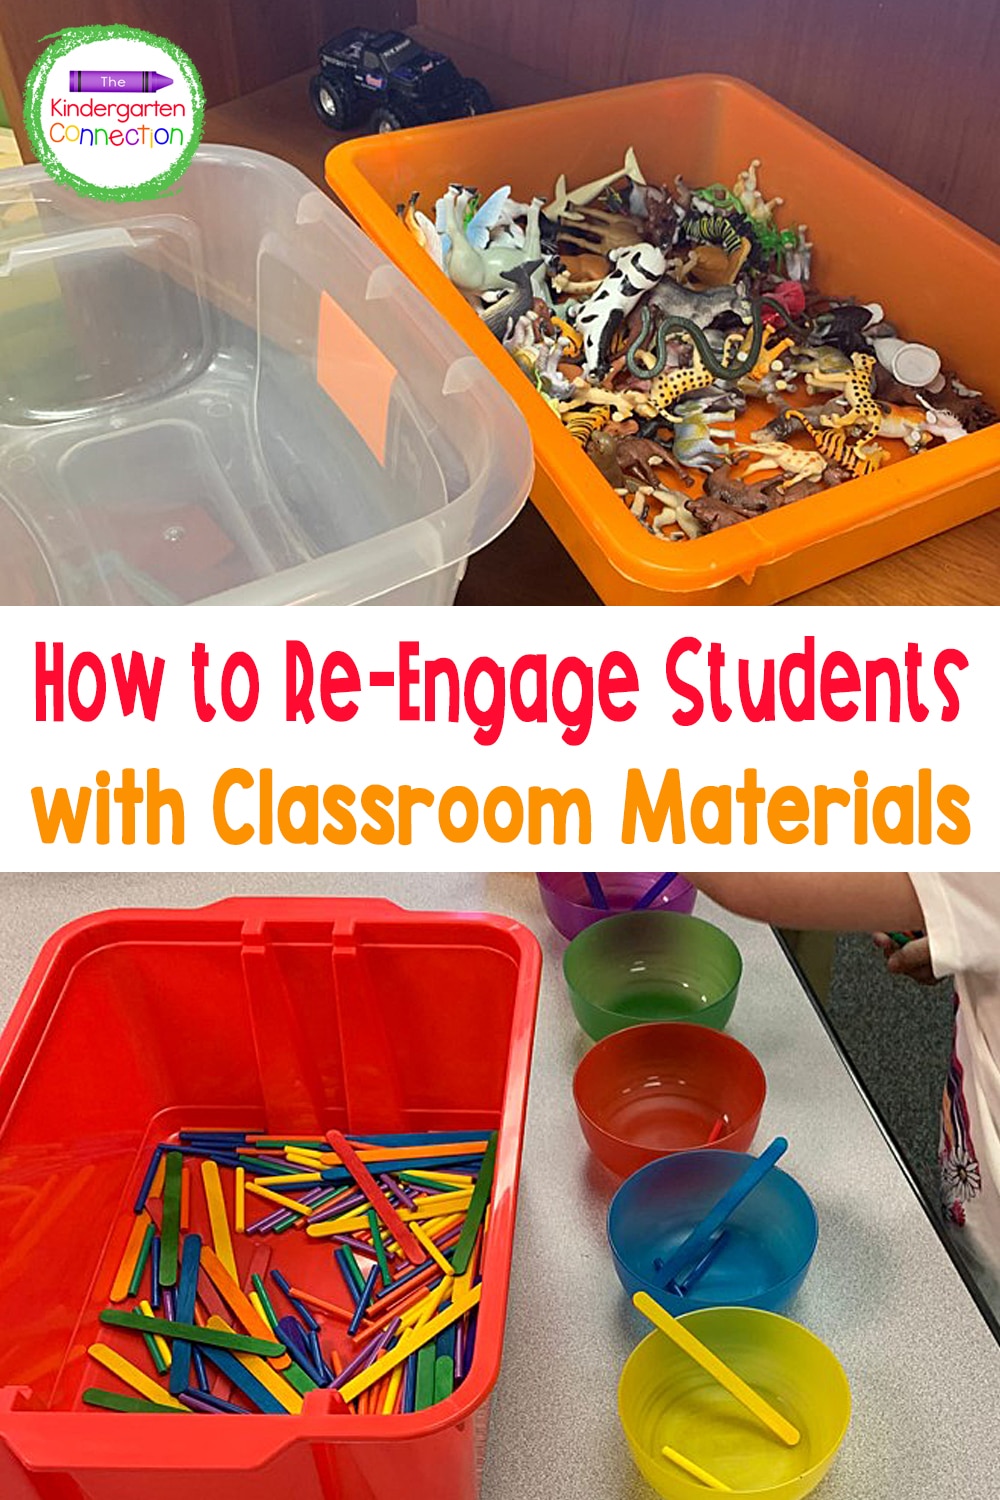 Before you put old items and supplies away, check out this simple tip for how to re-engage students with classroom materials!